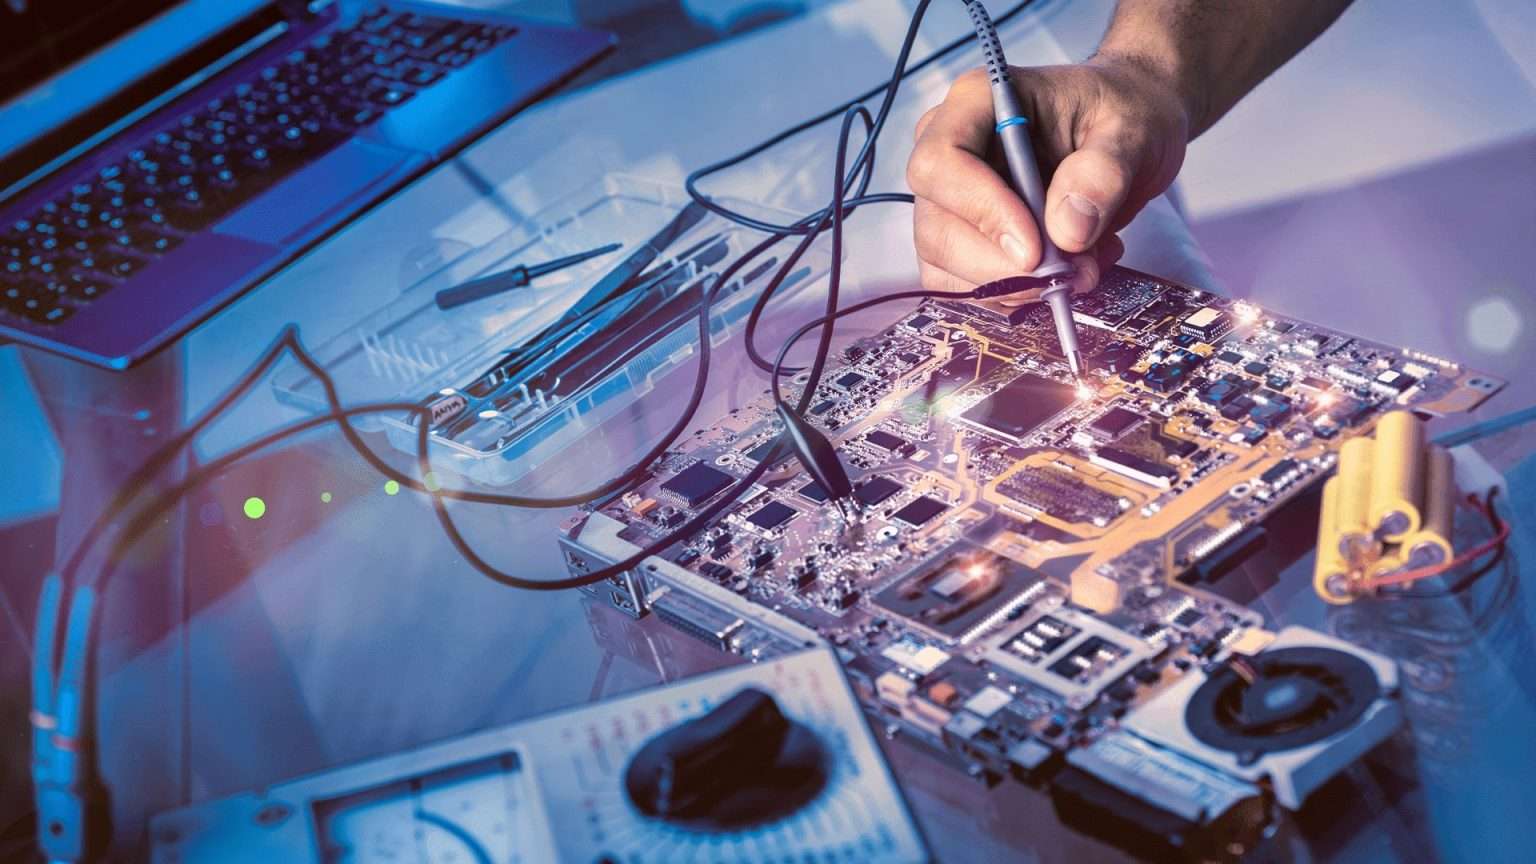 A close-up view of a motherboard being repaired, showing various electronic components and soldering equipment